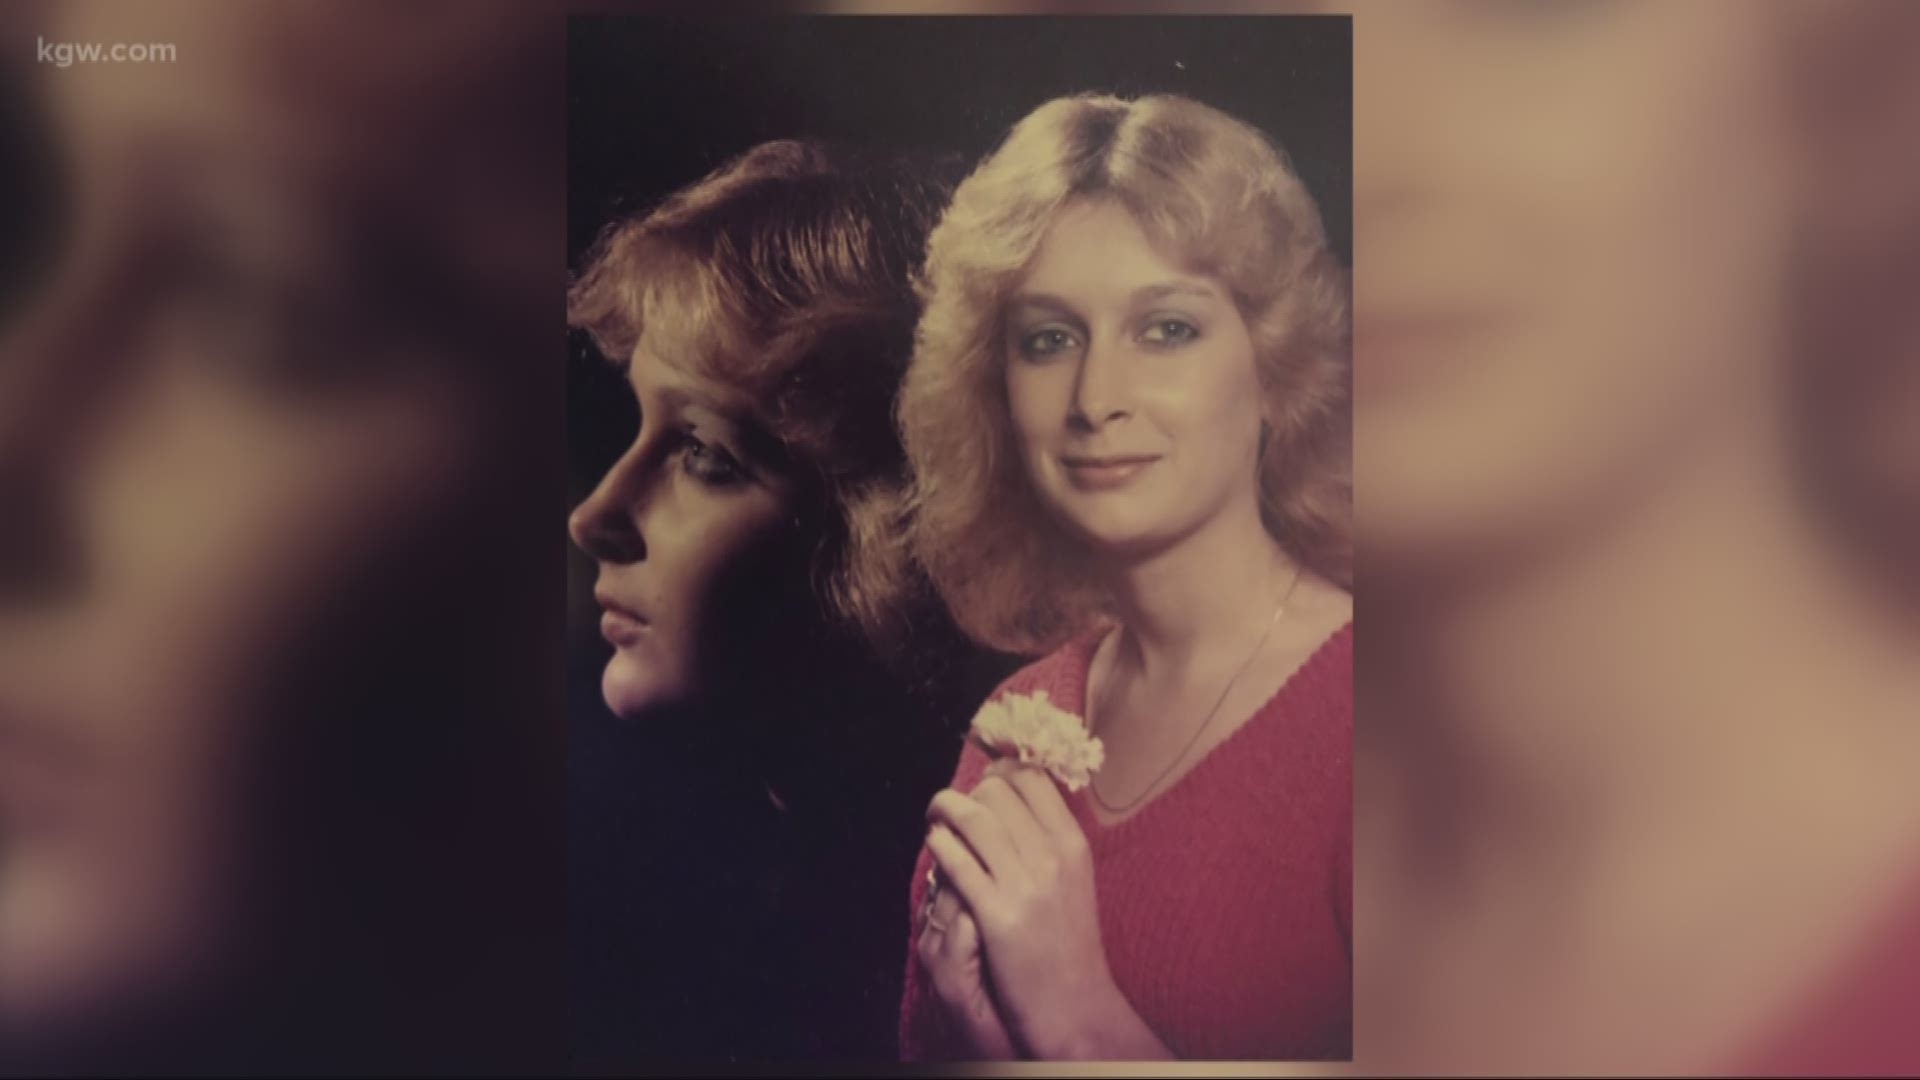 Police used DNA evidence to solve a cold case and arrest an Oregon man for murder.